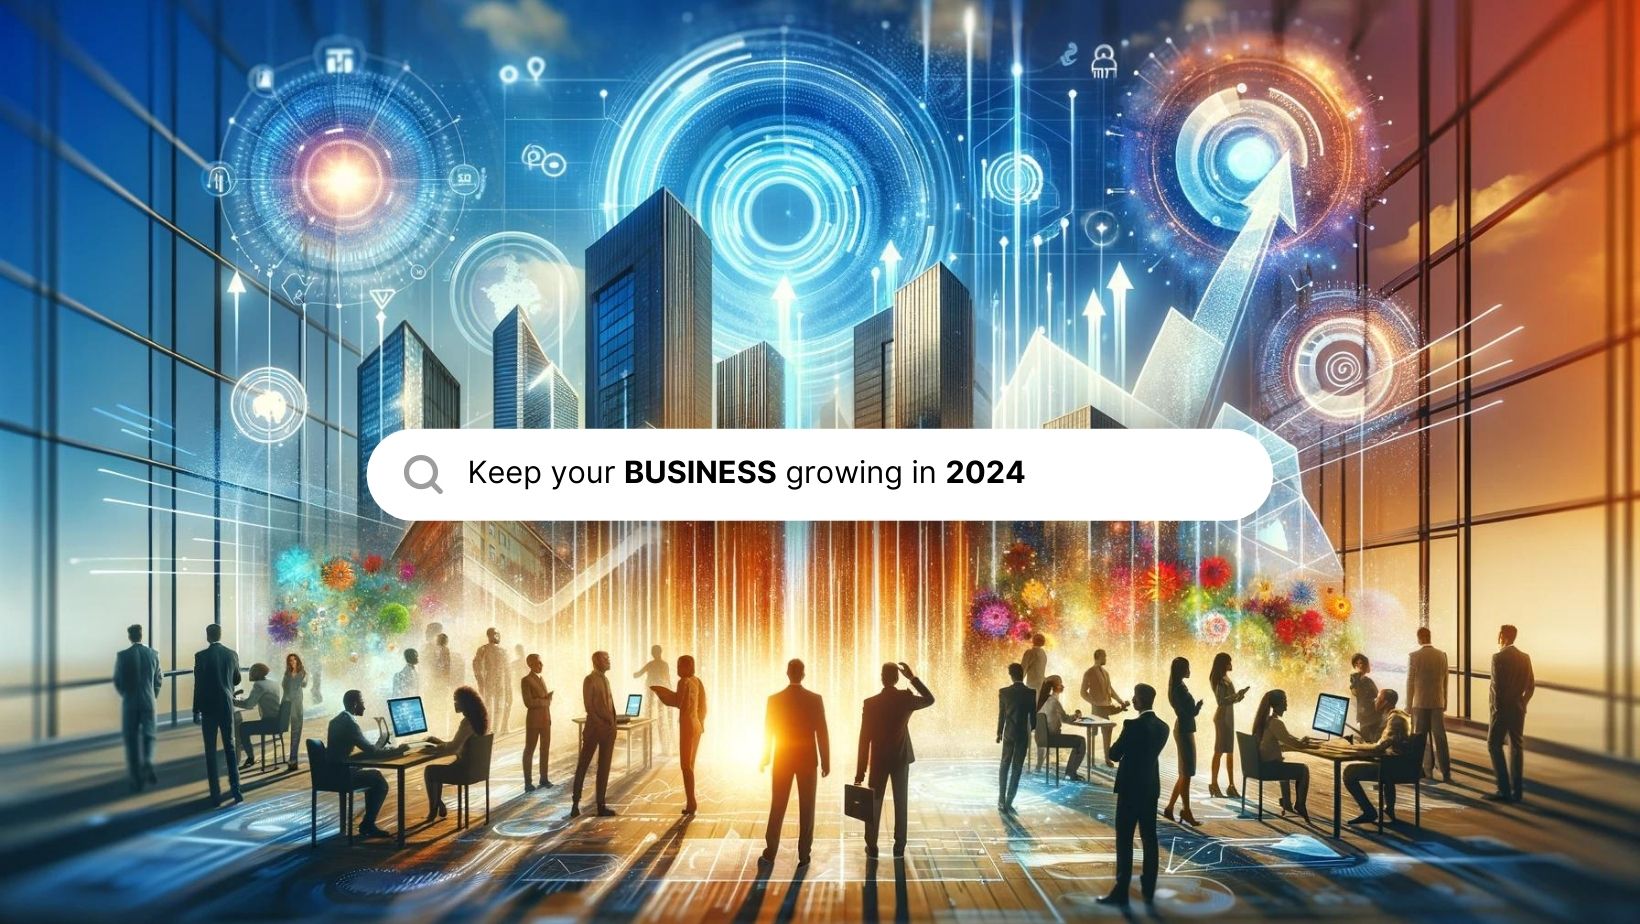 Keep your BUSINESS growing in 2024